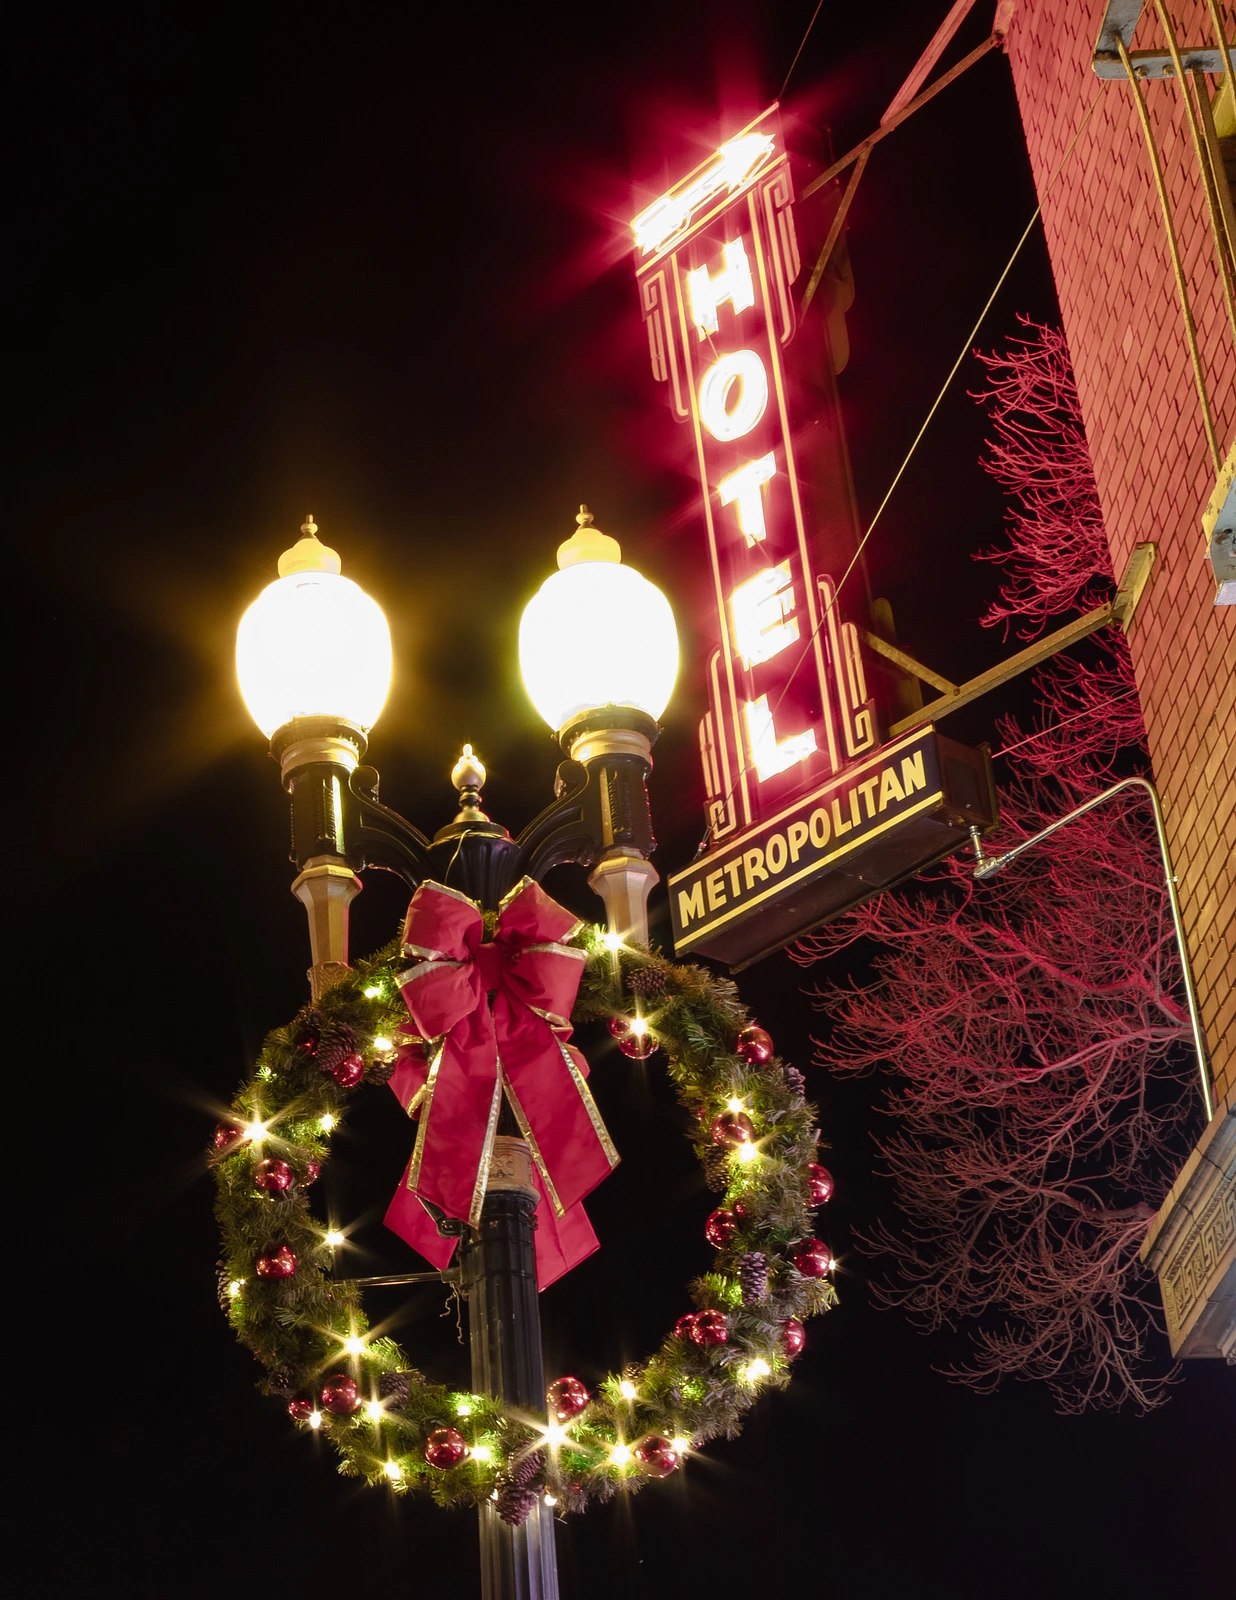 Neon sign and street lamp with Christmas decoration